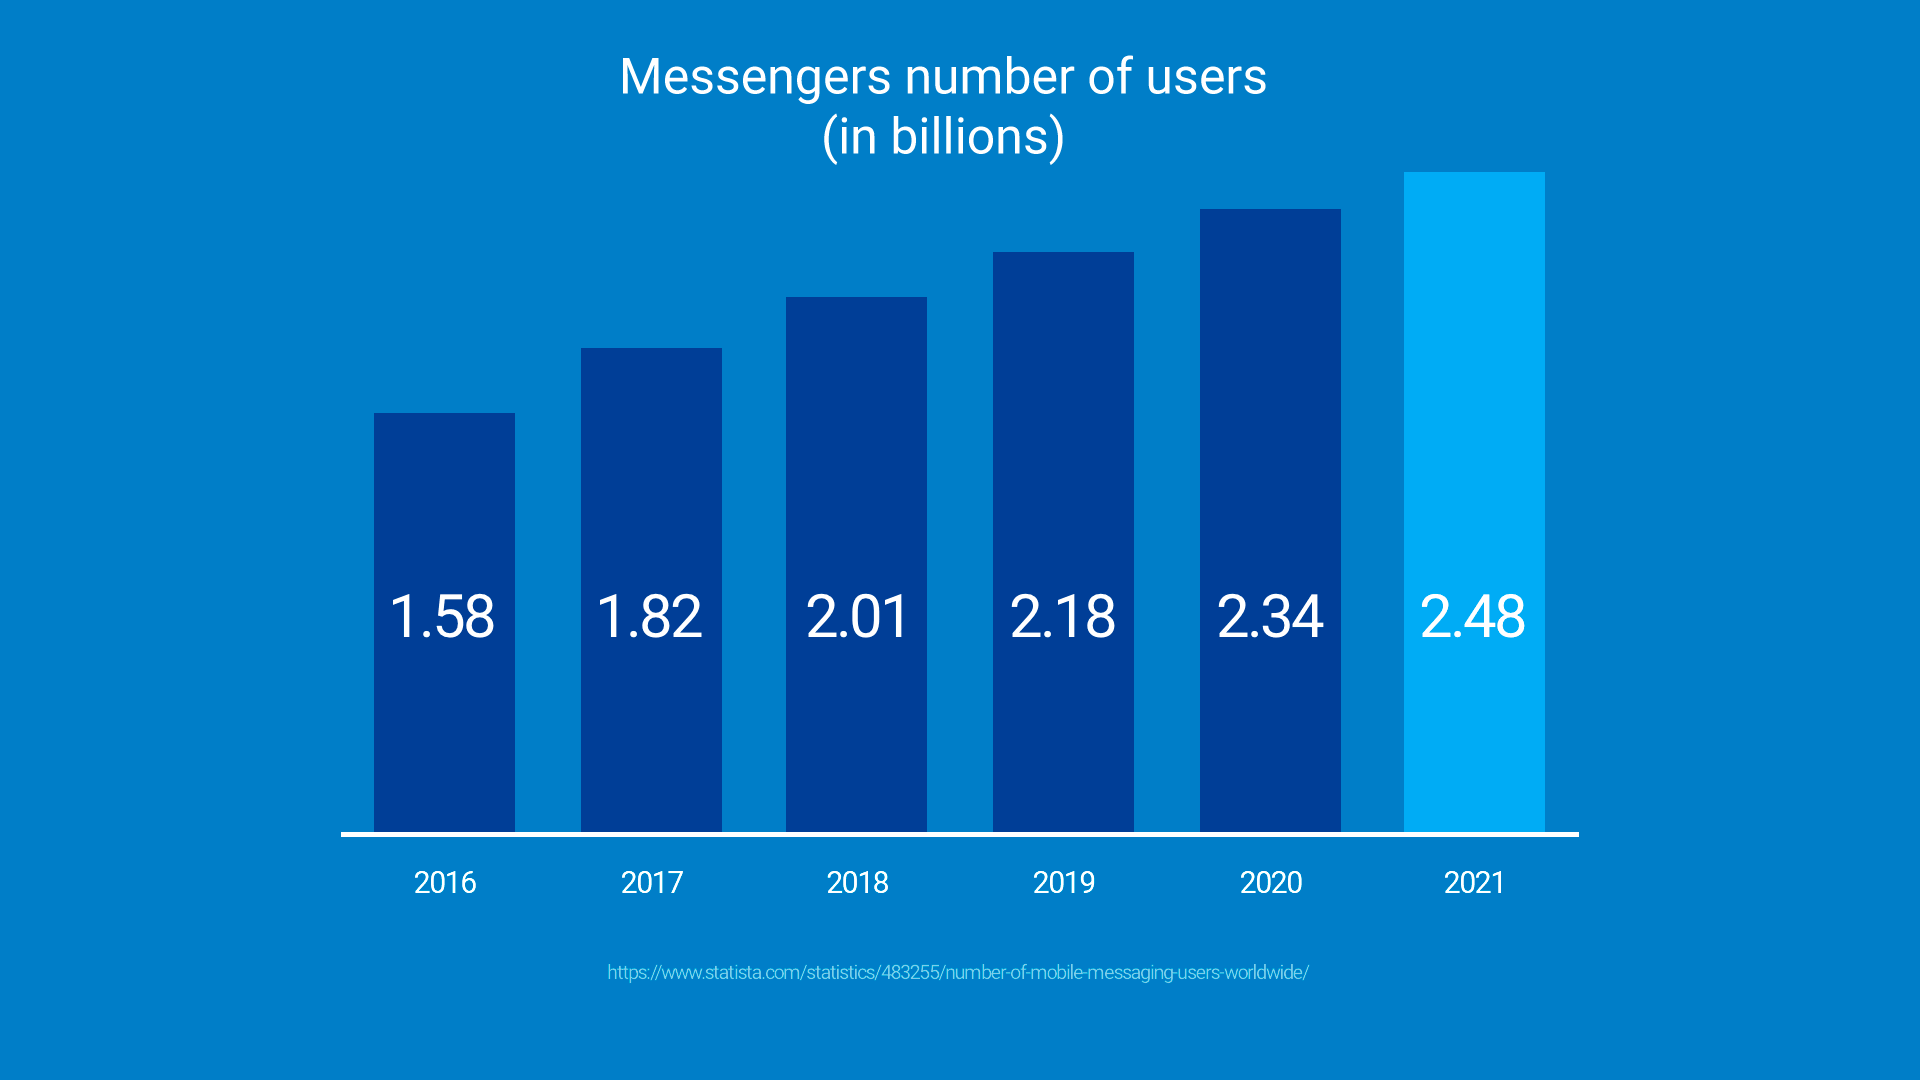 Up to 2.48 billion people are projected to use Messengers by 2021